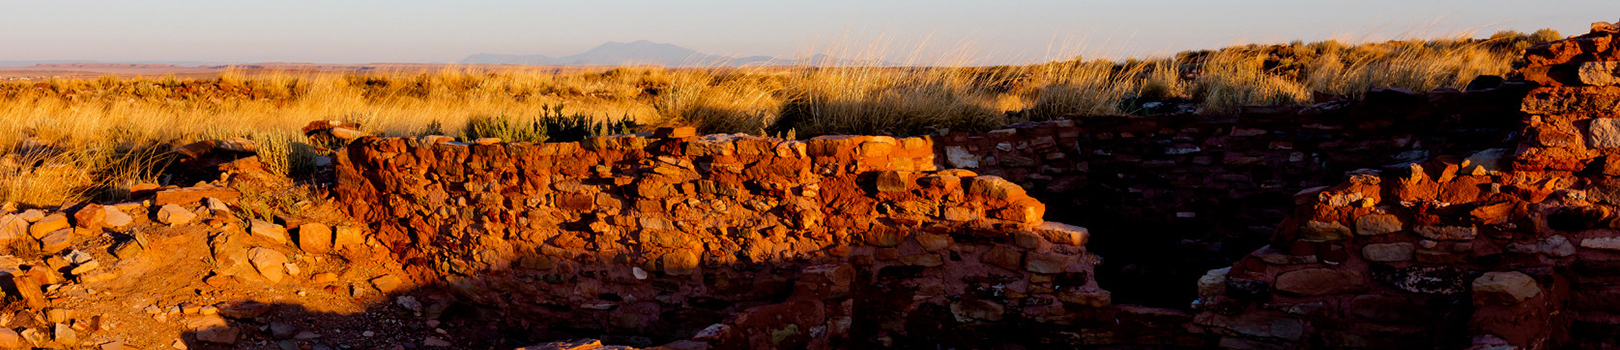 Ancient dwellings glow red in the late afternoon sun on the yellow Northern Arizona prairie.